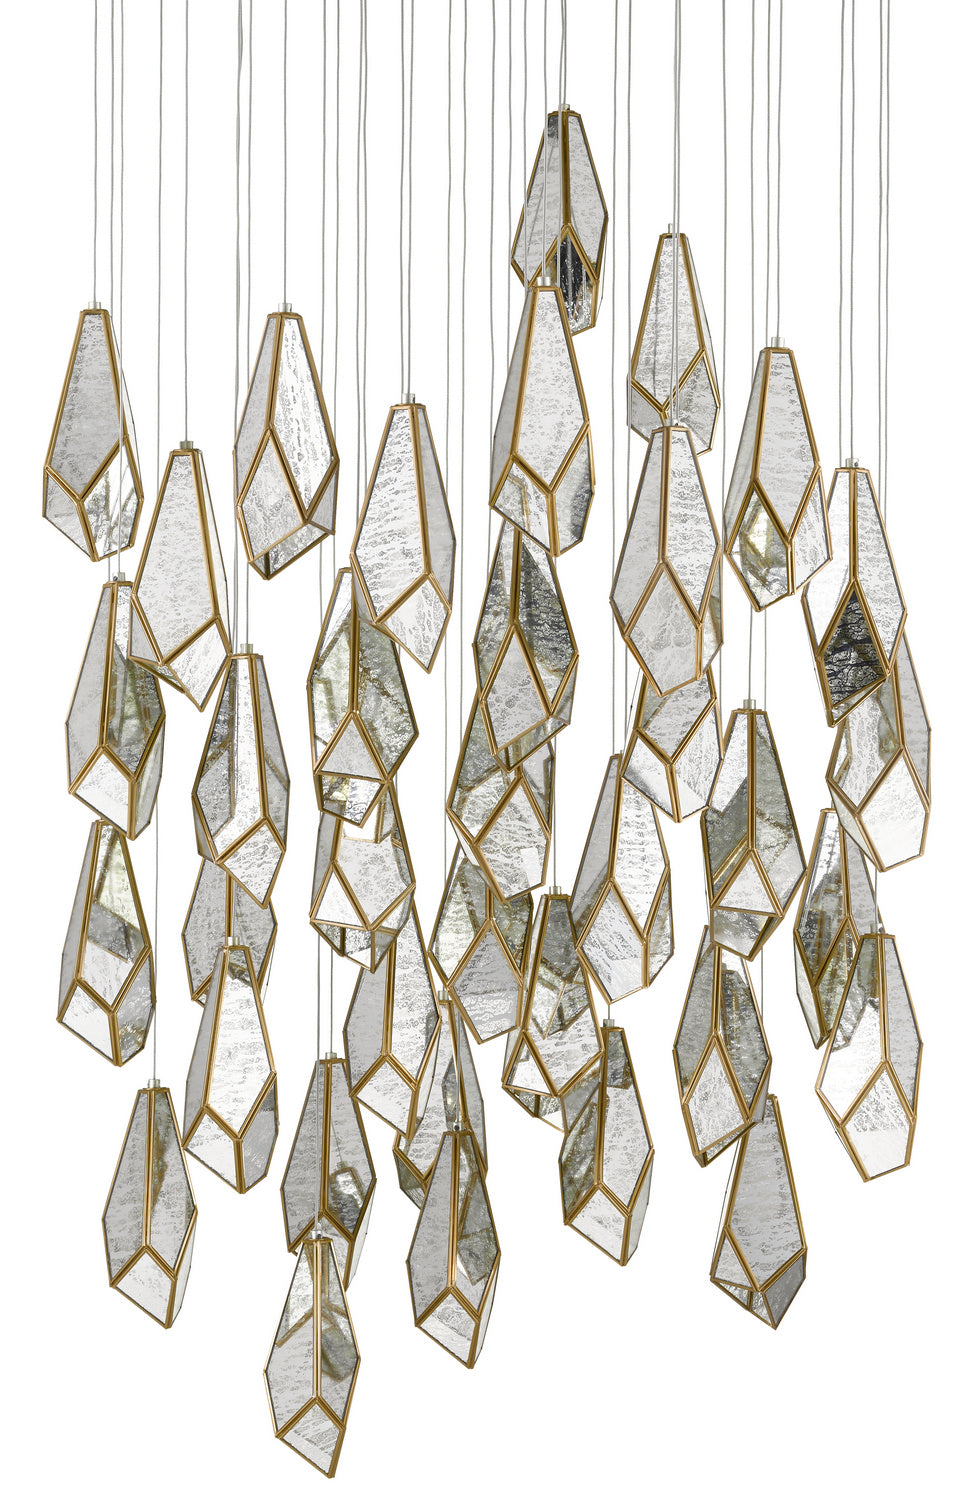 36 Light Pendant from the Glace collection in Painted Silver/Antique Brass finish